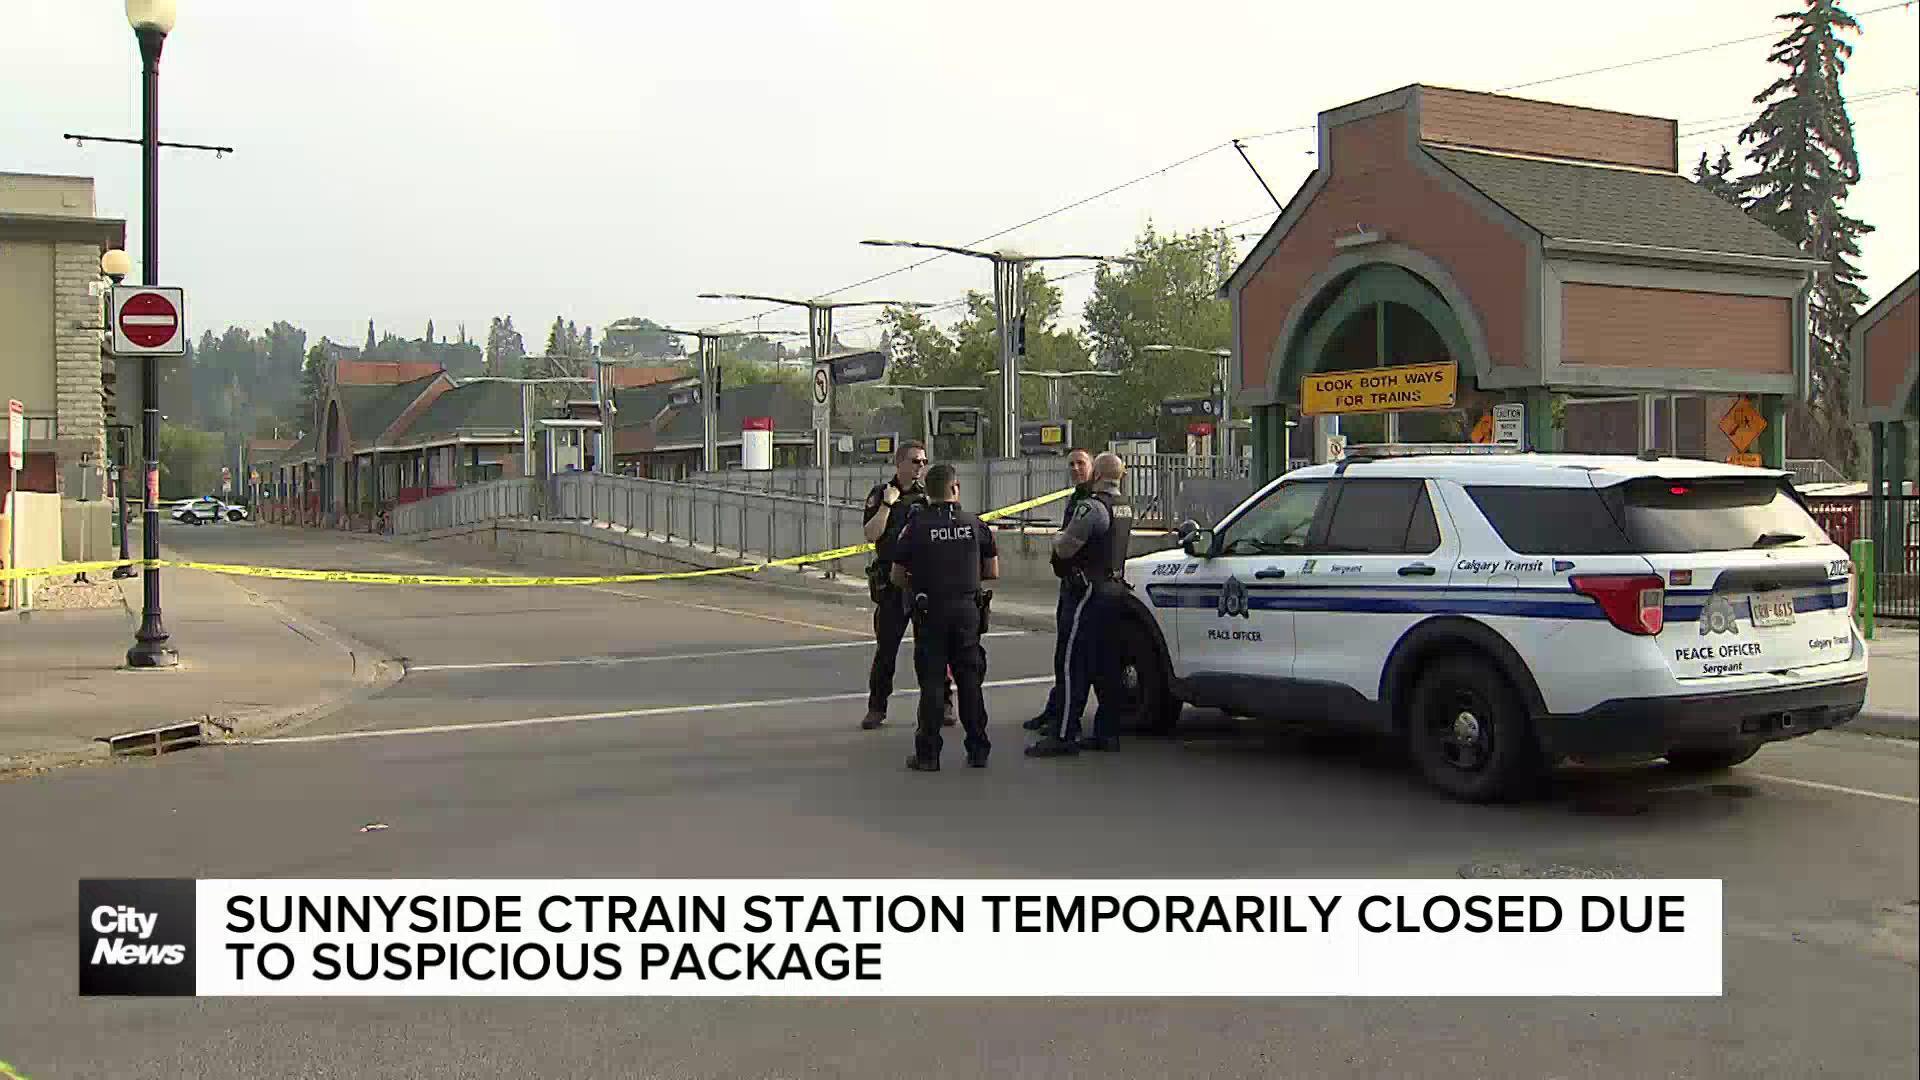 Sunnyside CTrain station temporarily closed due to suspicious package